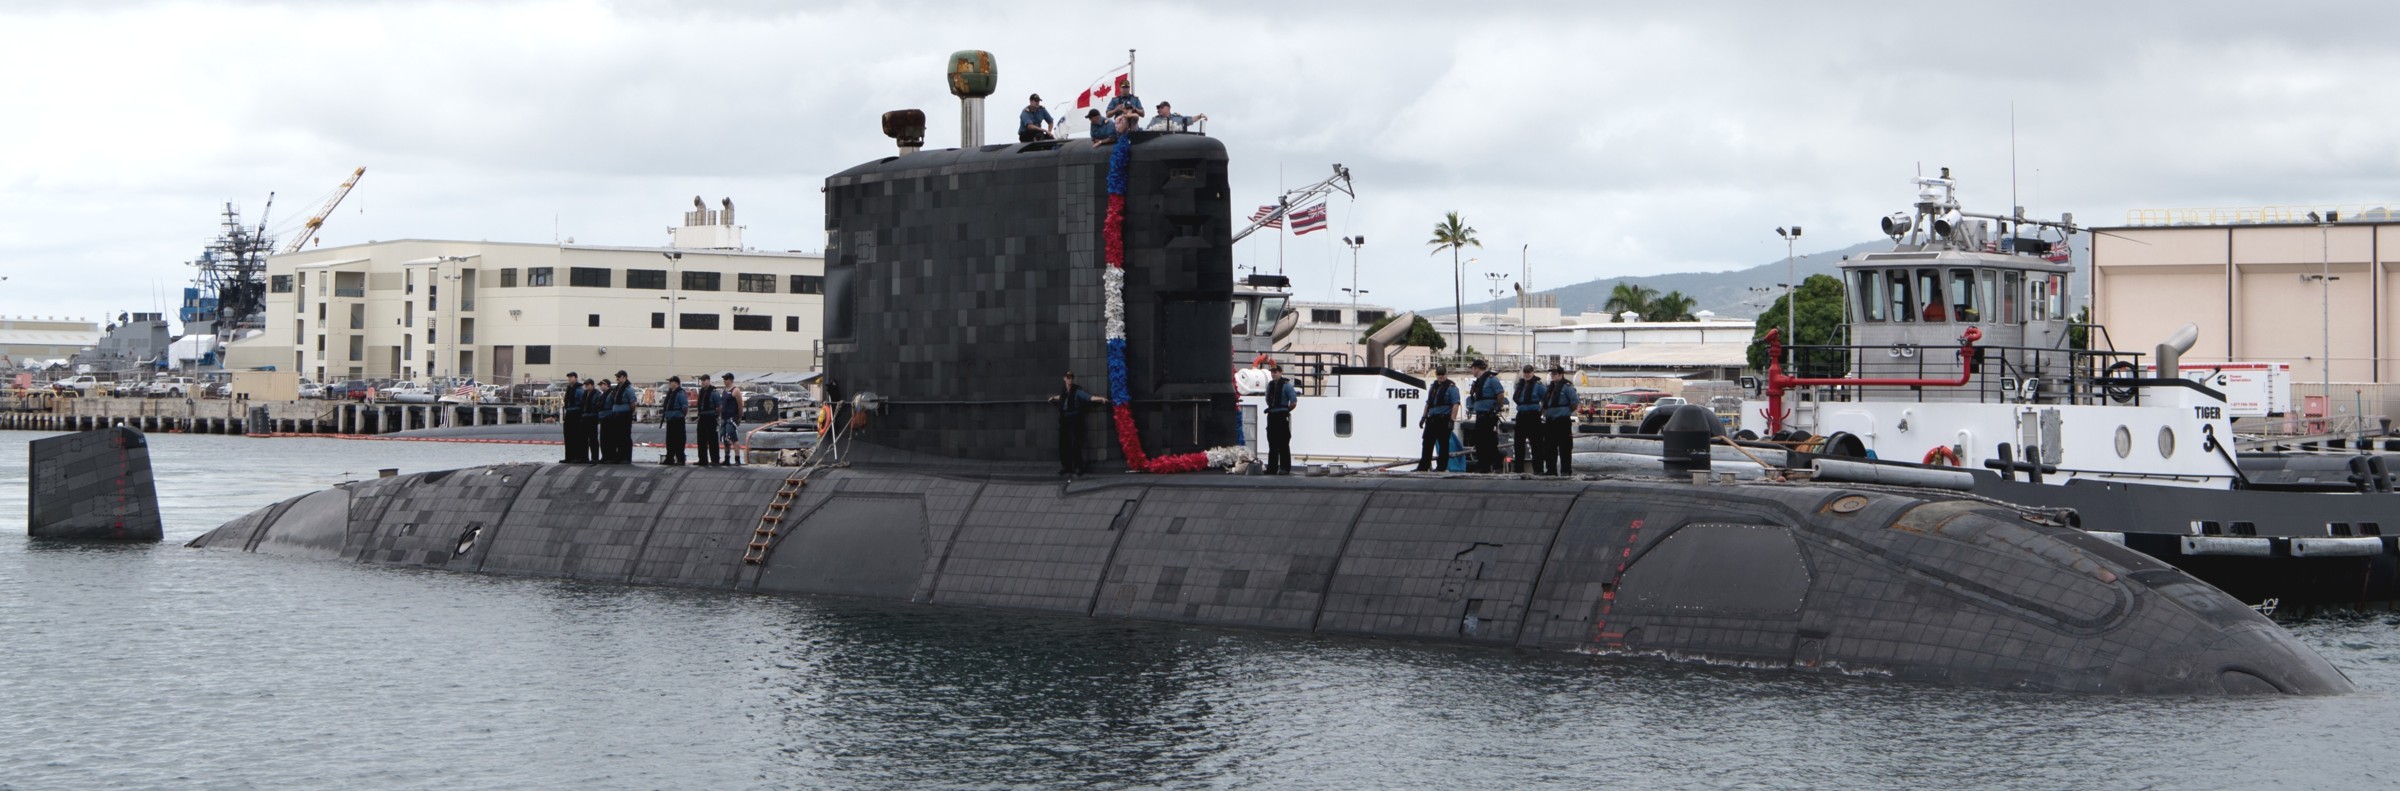 ssk-879 hmcs chicoutimi victoria upholder class patrol submarine ncsm royal canadian navy 13 pearl harbor hawaii